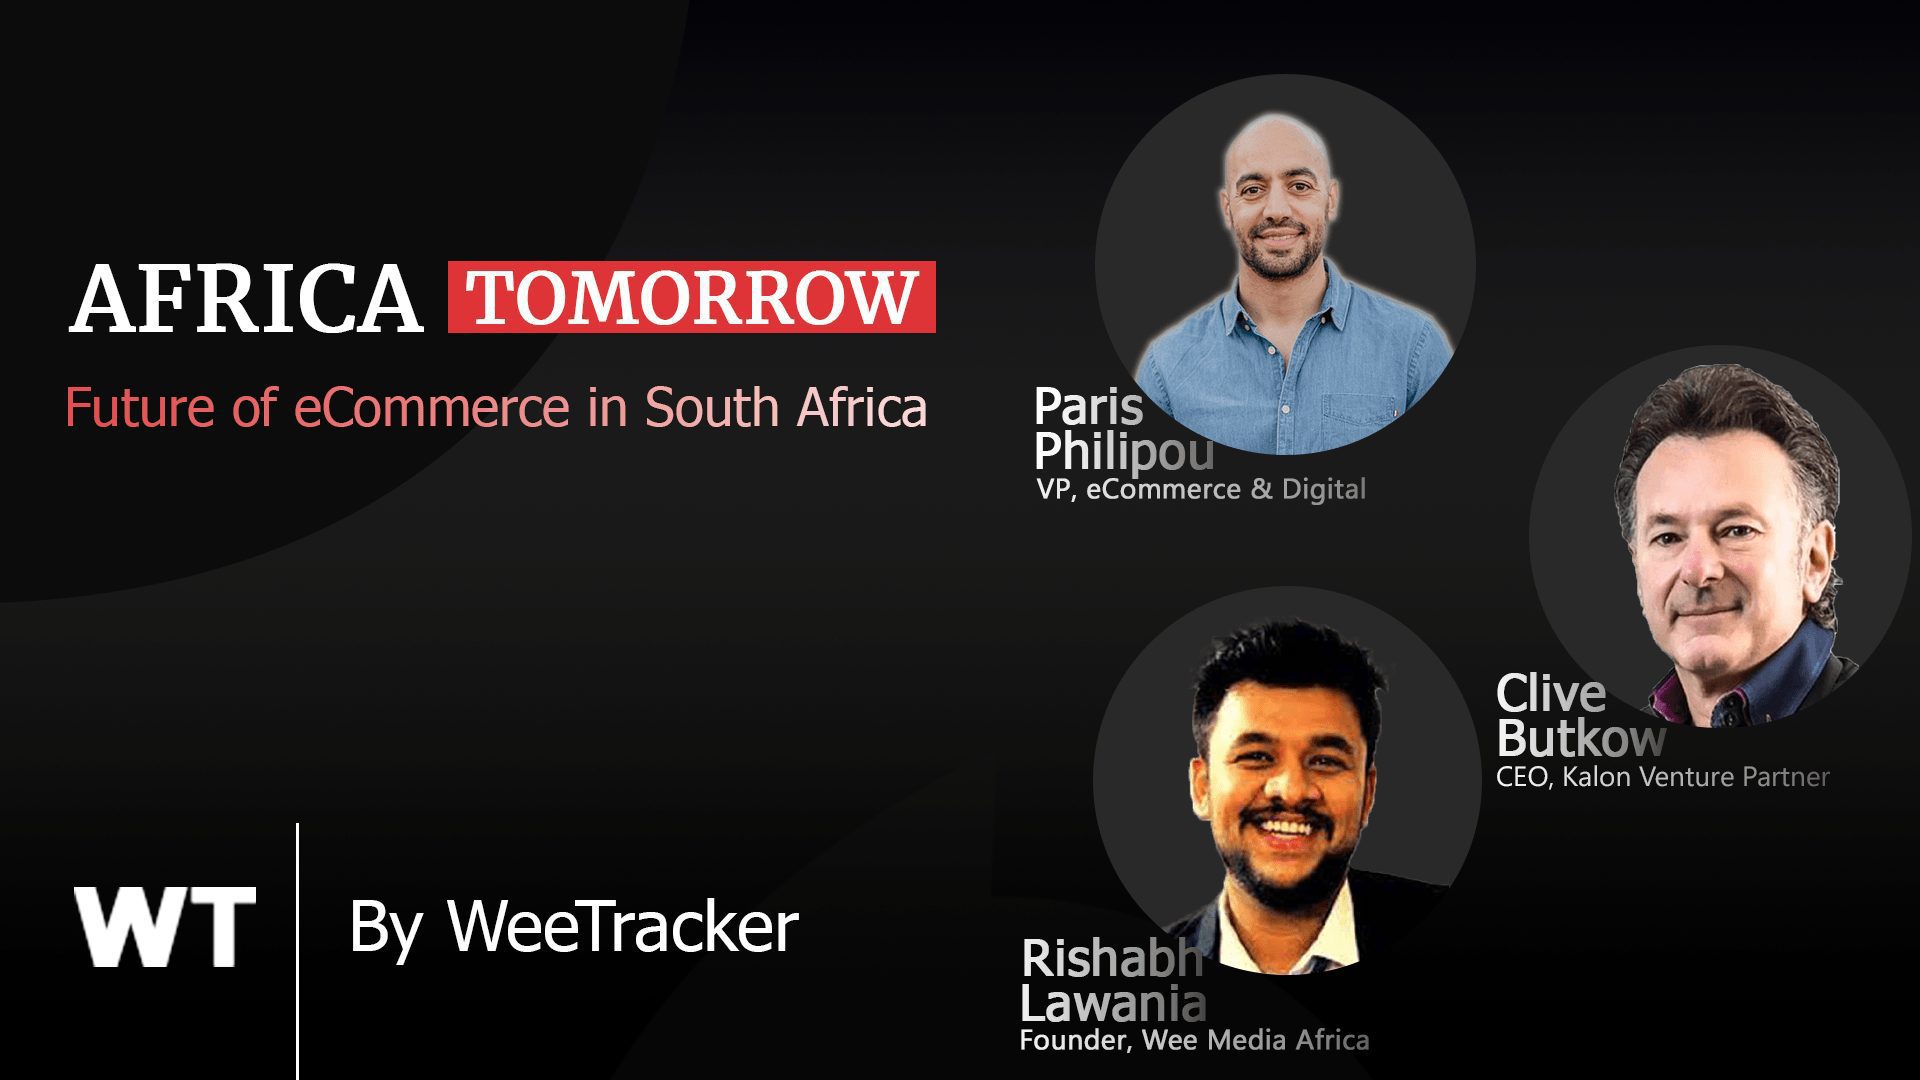 Future of ecommerce in South Africa